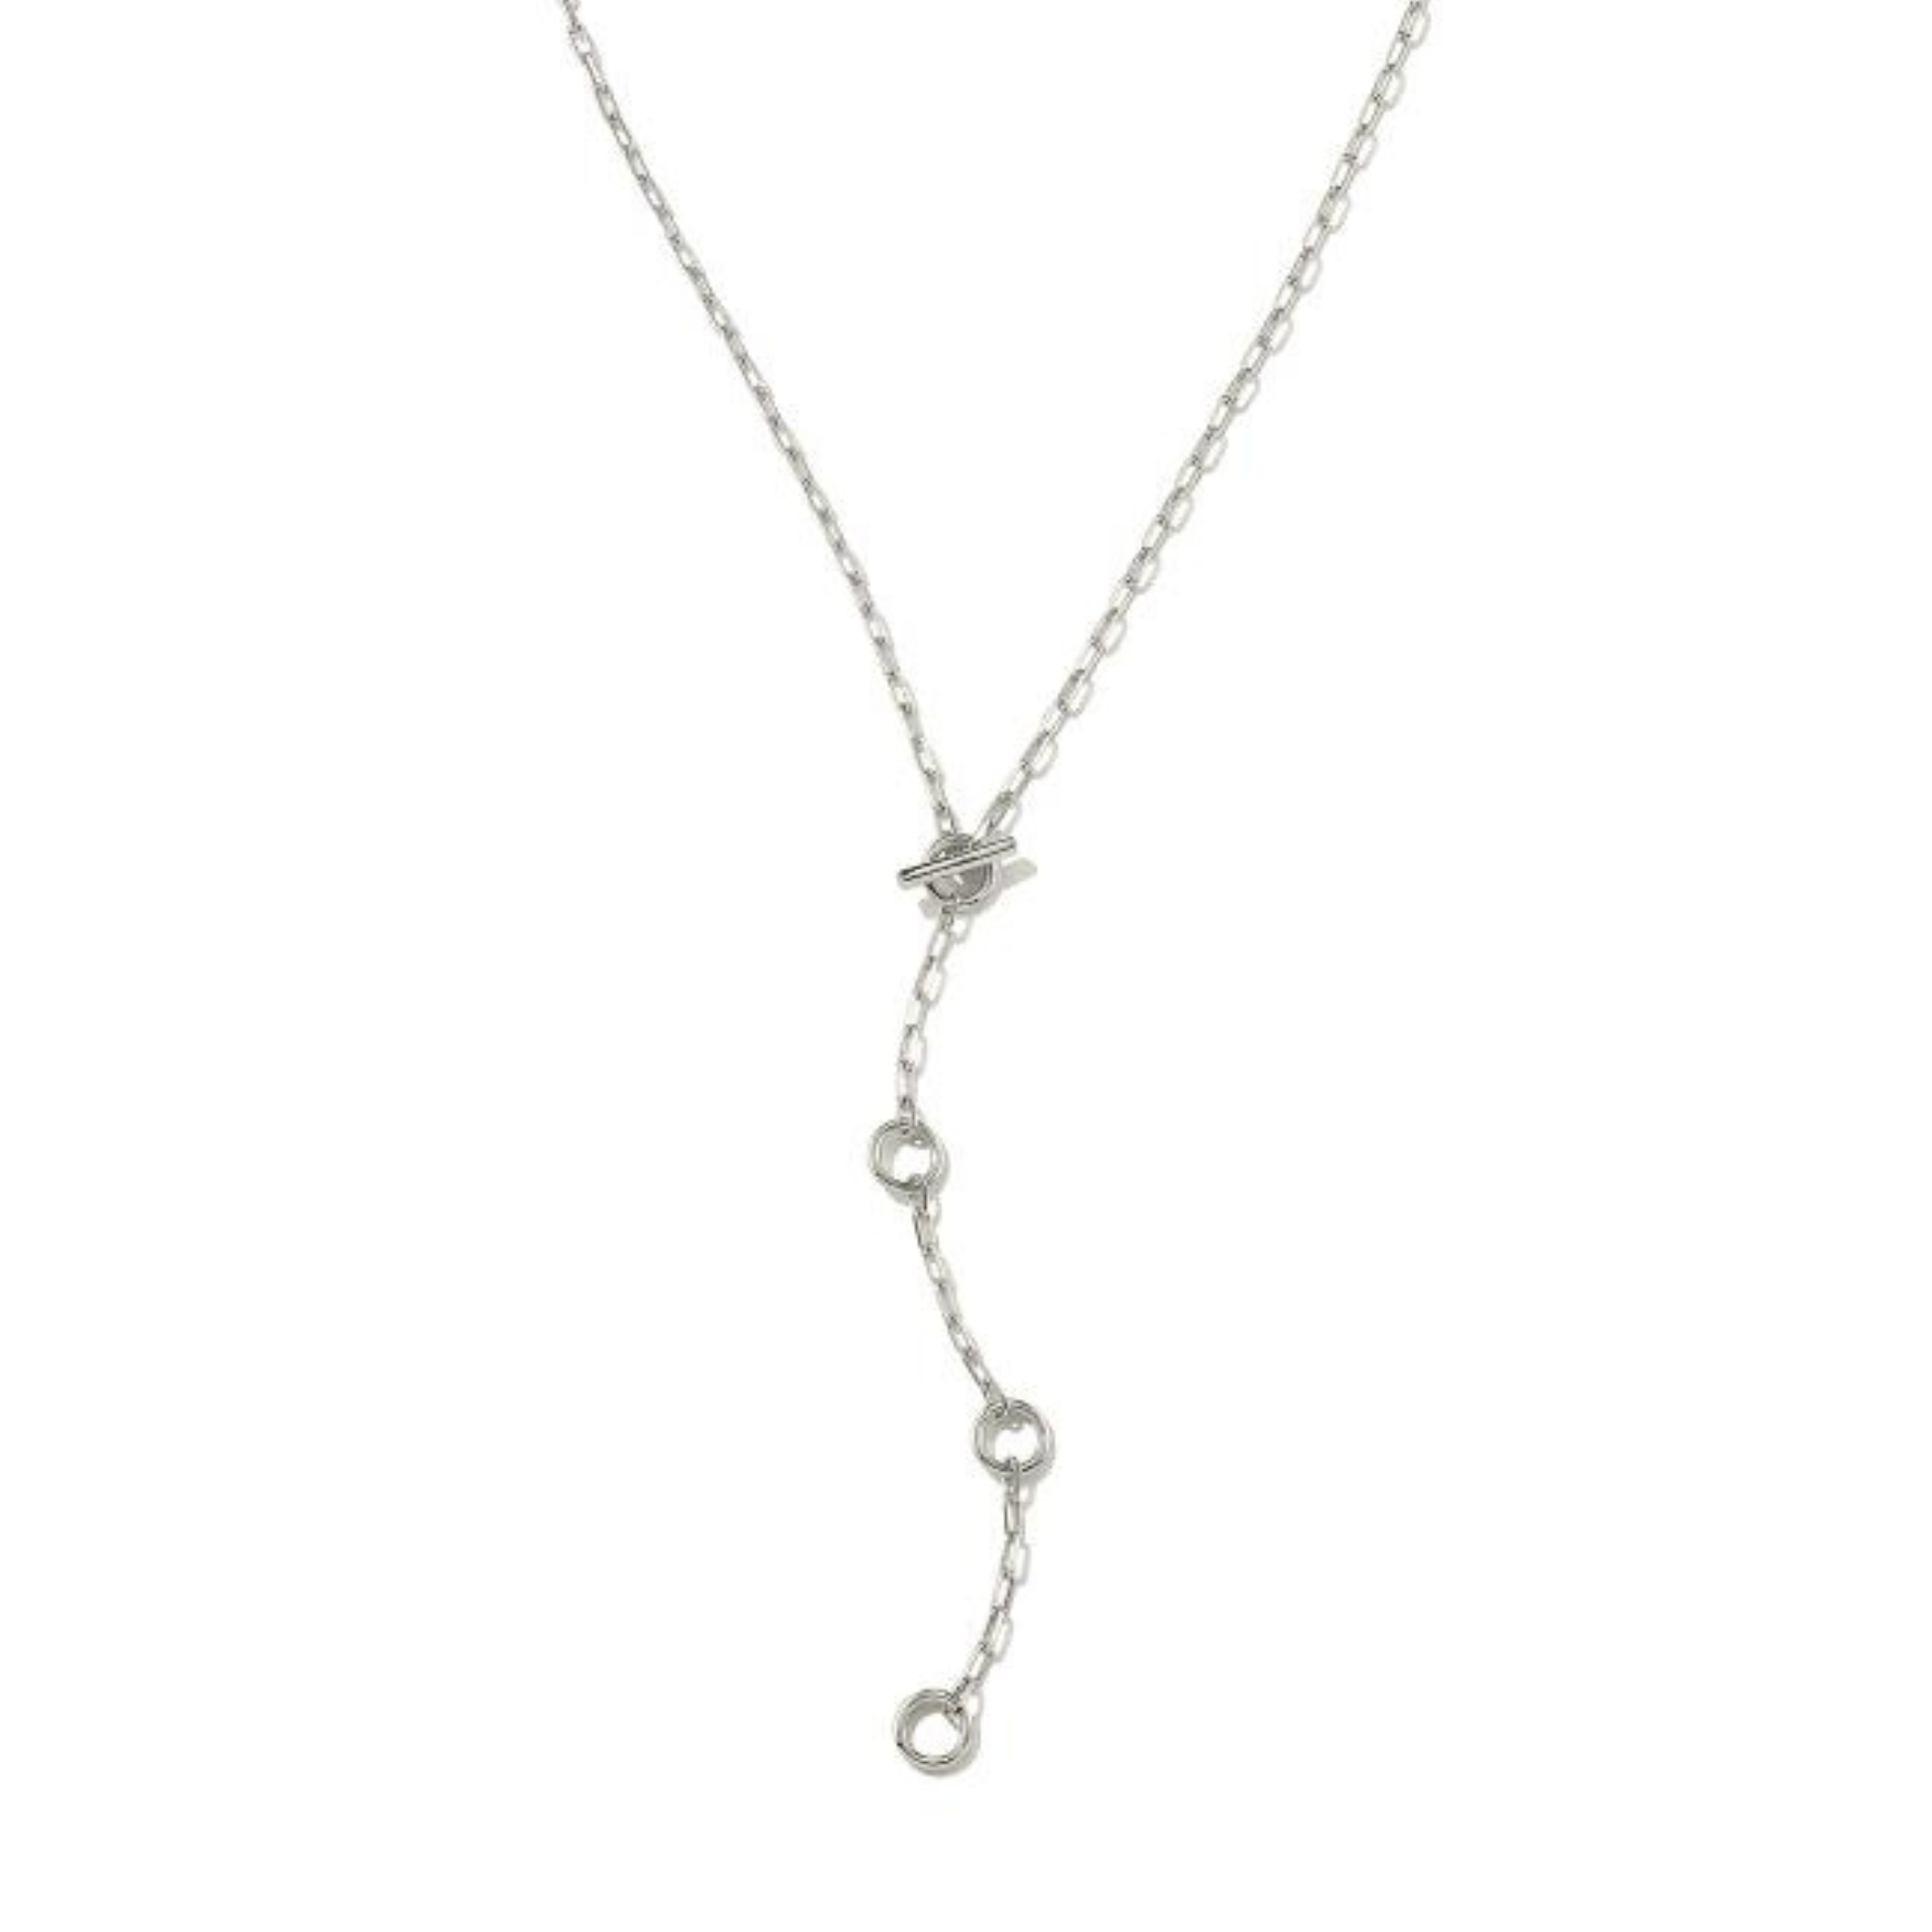 Kendra Scott | Andi Y Necklace in Silver - Giddy Up Glamour Boutique